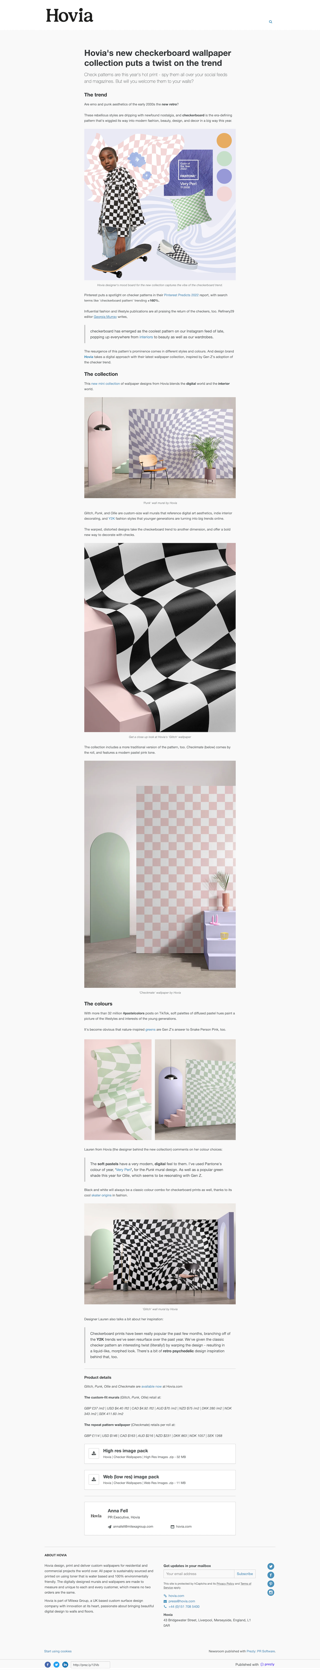 Hovia's new checkerboard wallpaper collection puts a twist on the trend